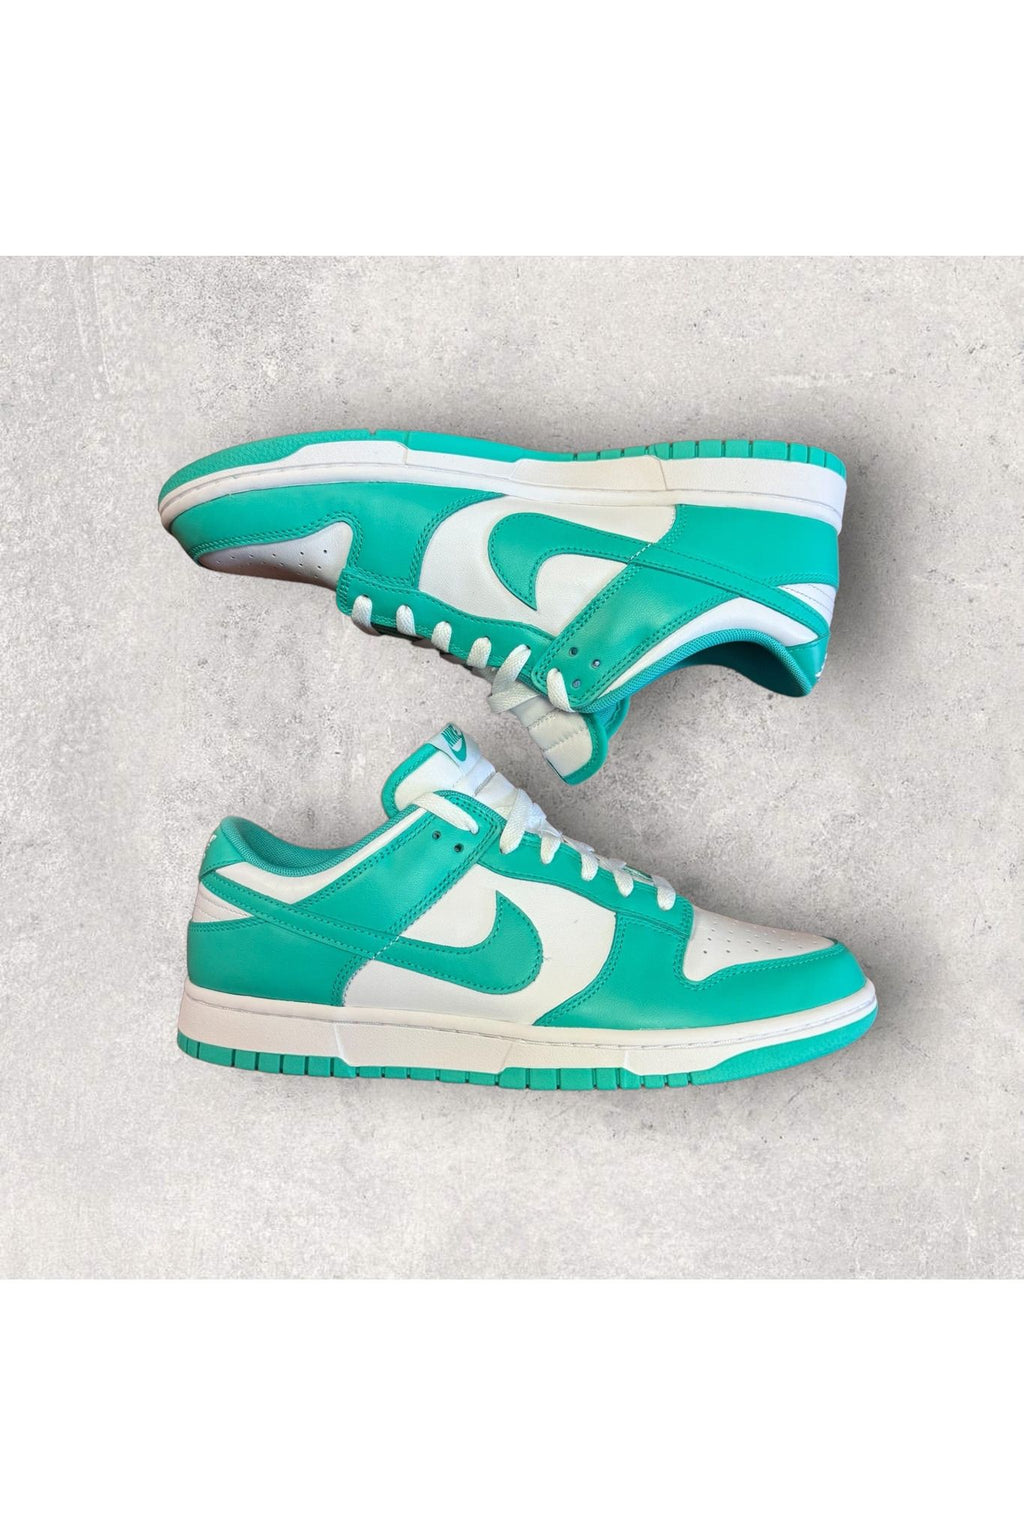 Nike Dunk Low CLEAR JADE